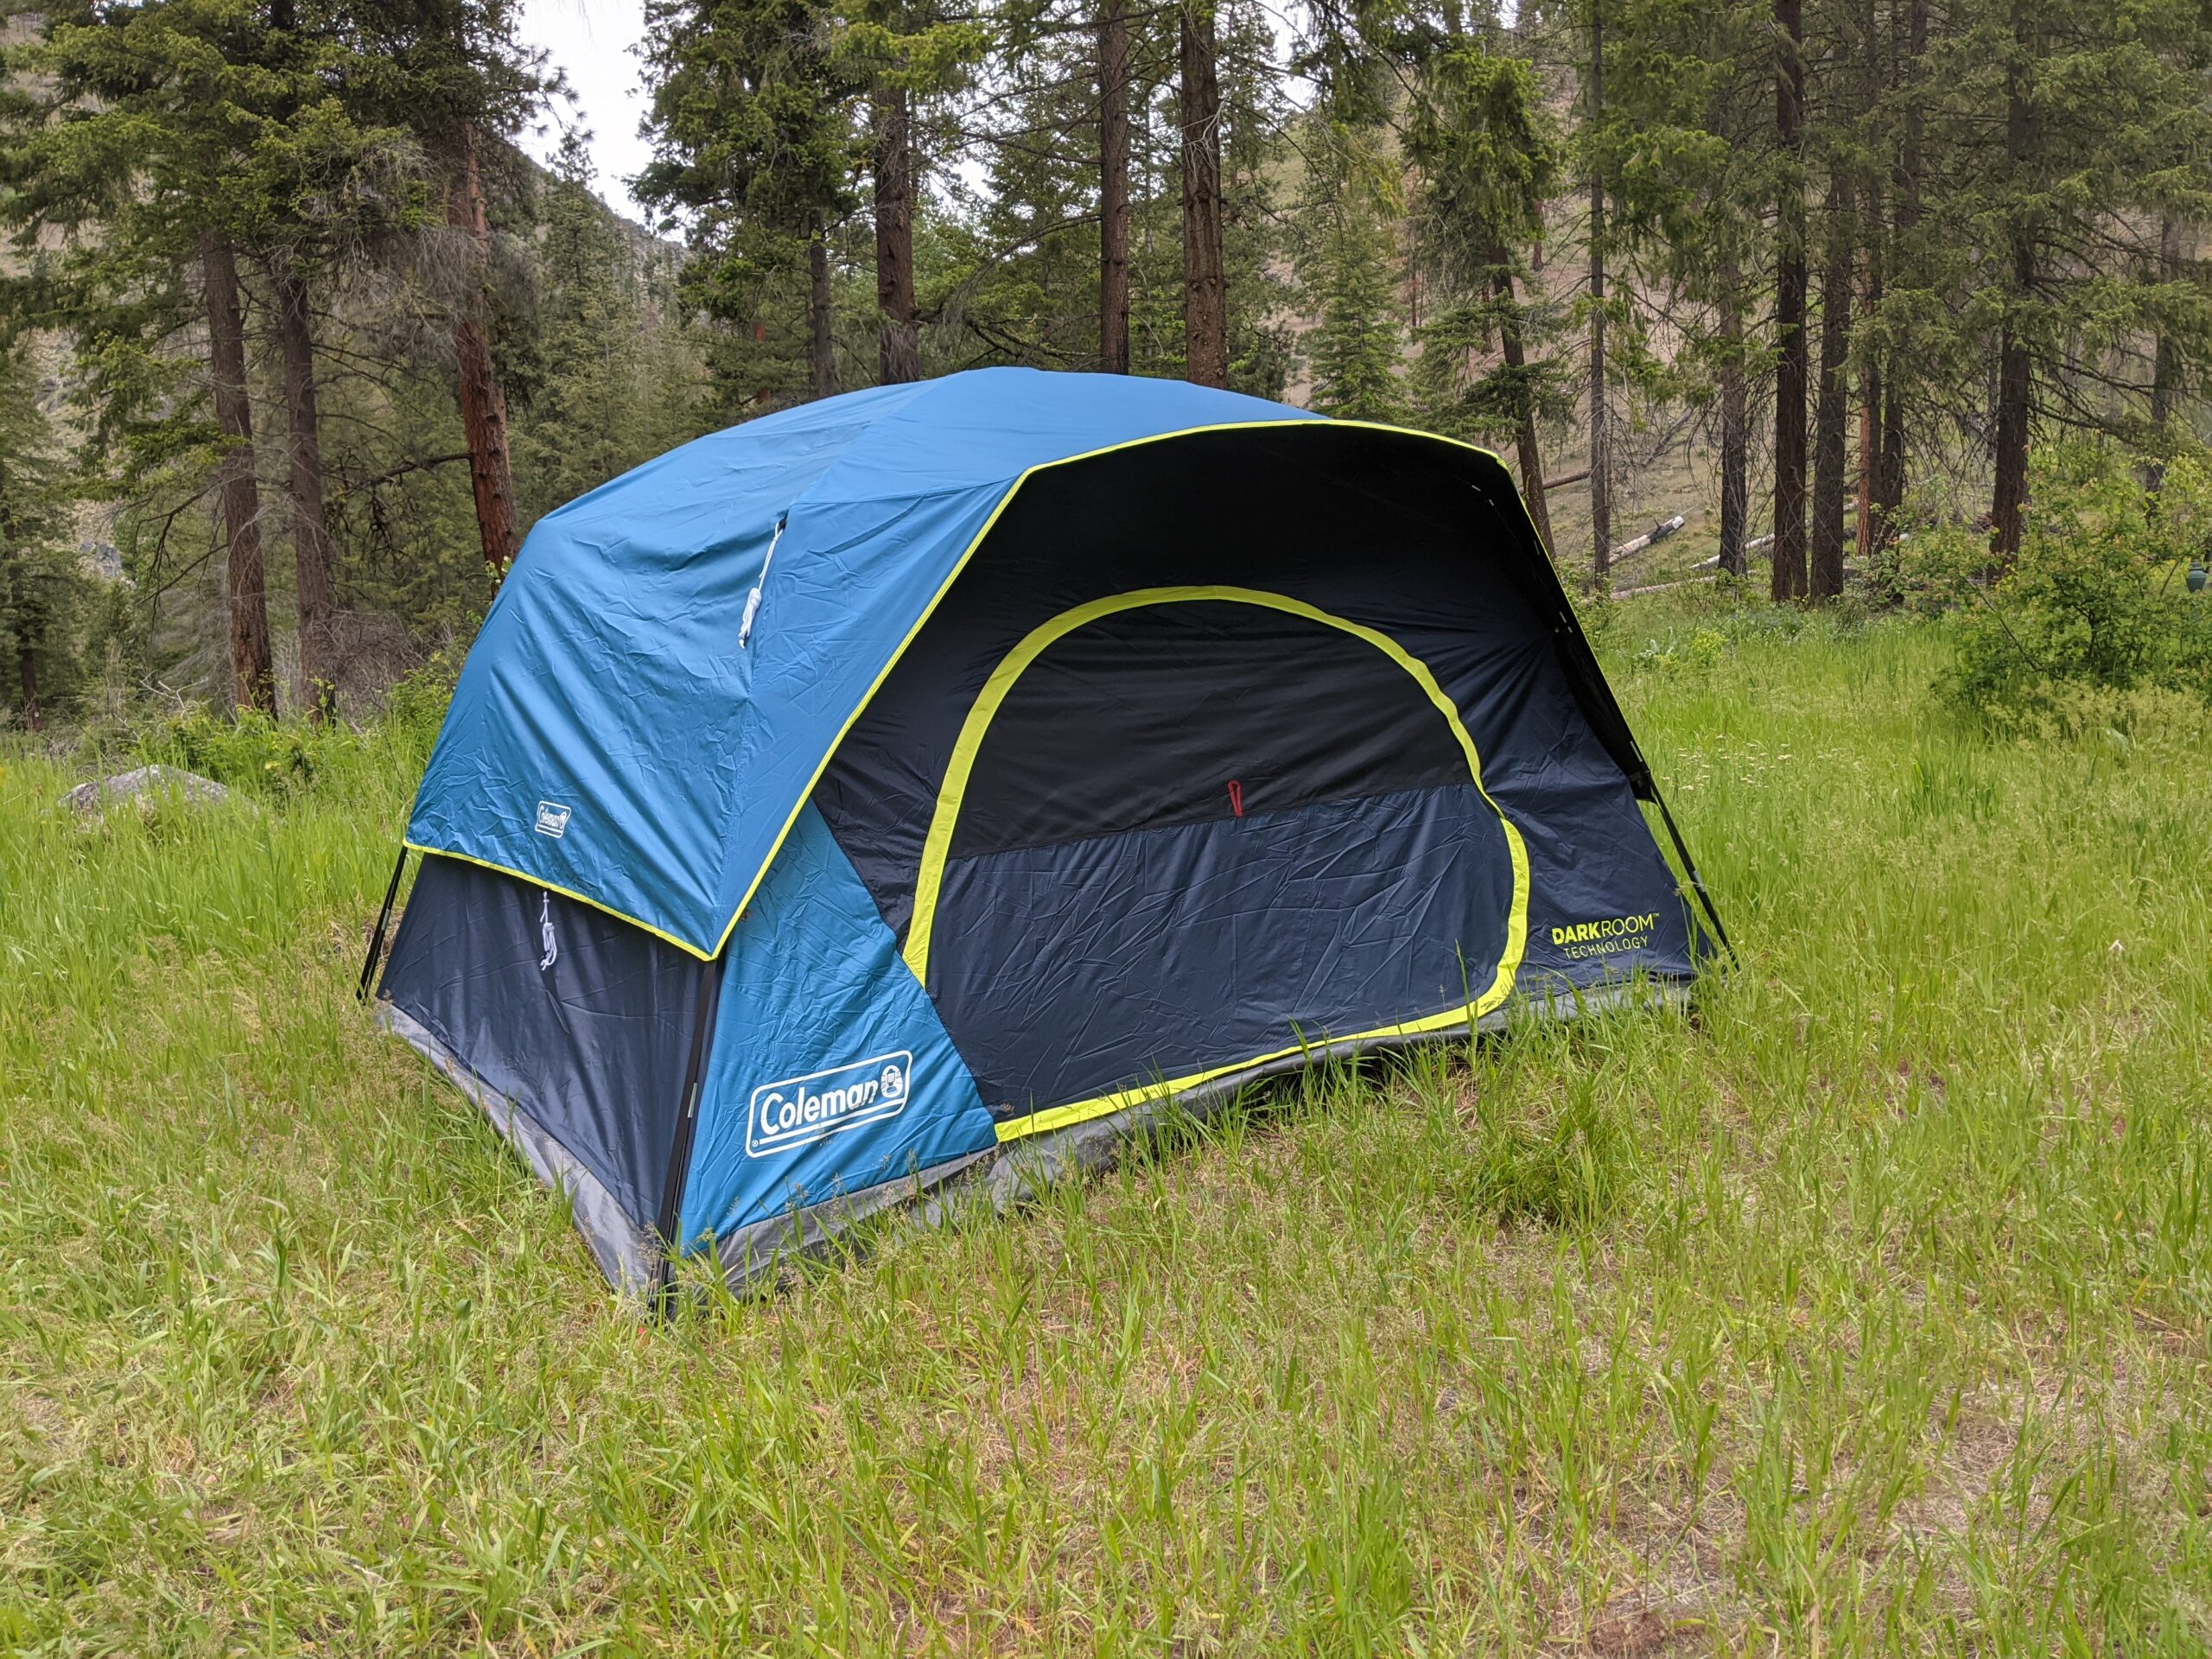 A very serviceable tent that does what it says it will do, even if it’s a little smaller than expected.